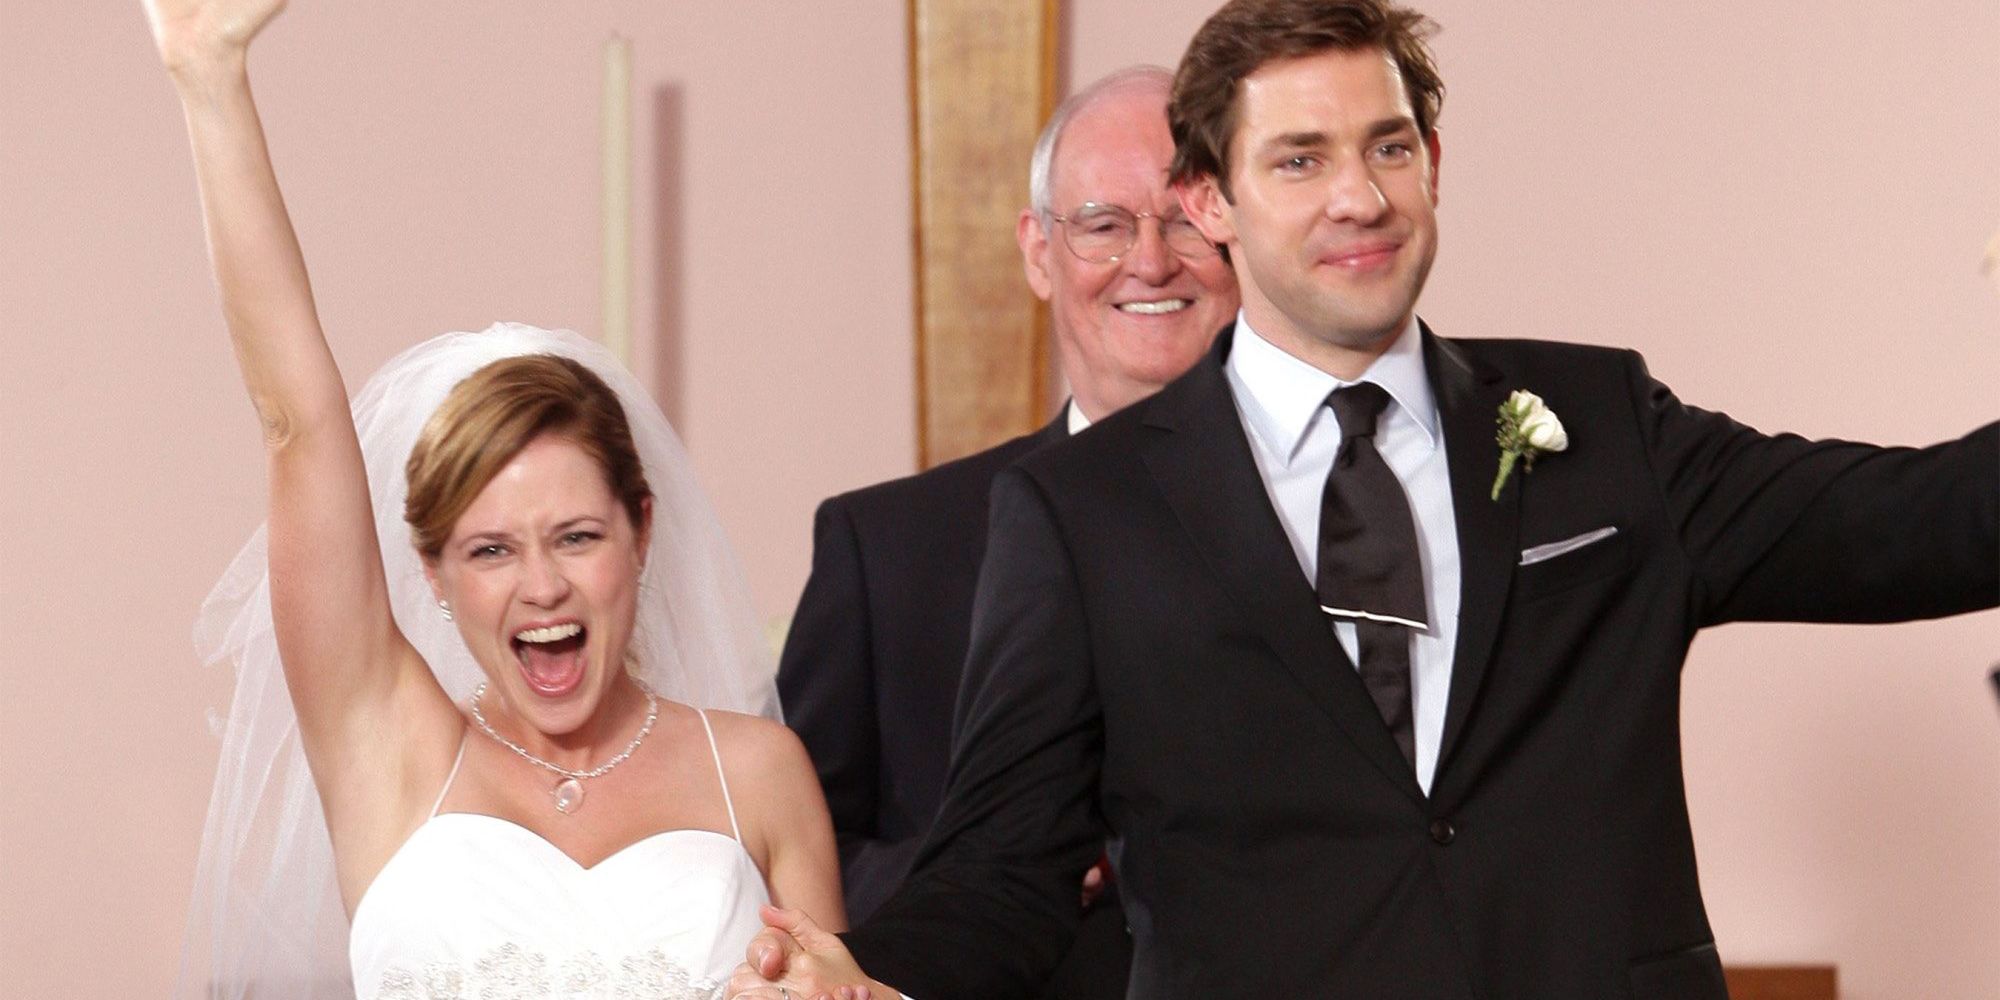 Jim and Pam smile at their wedding in The Office